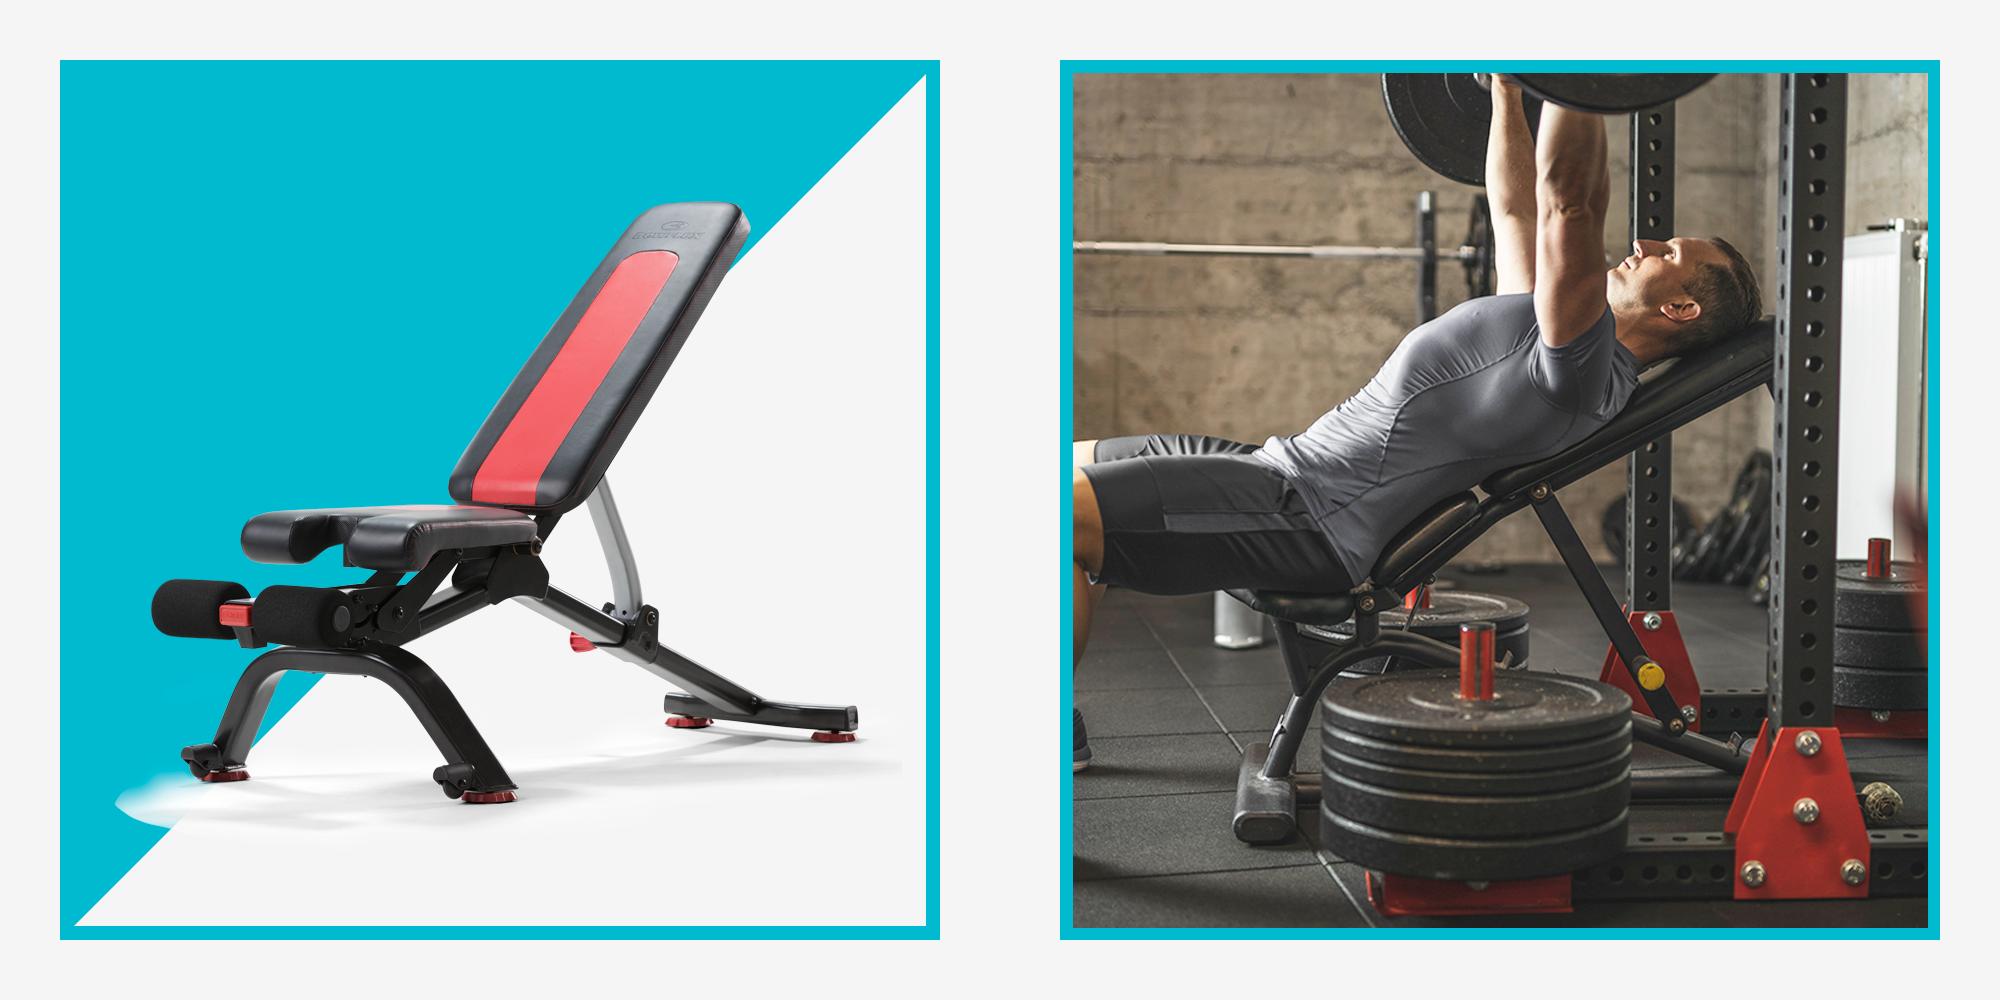 What Are the Best Piece of Home Fitness Equipment?